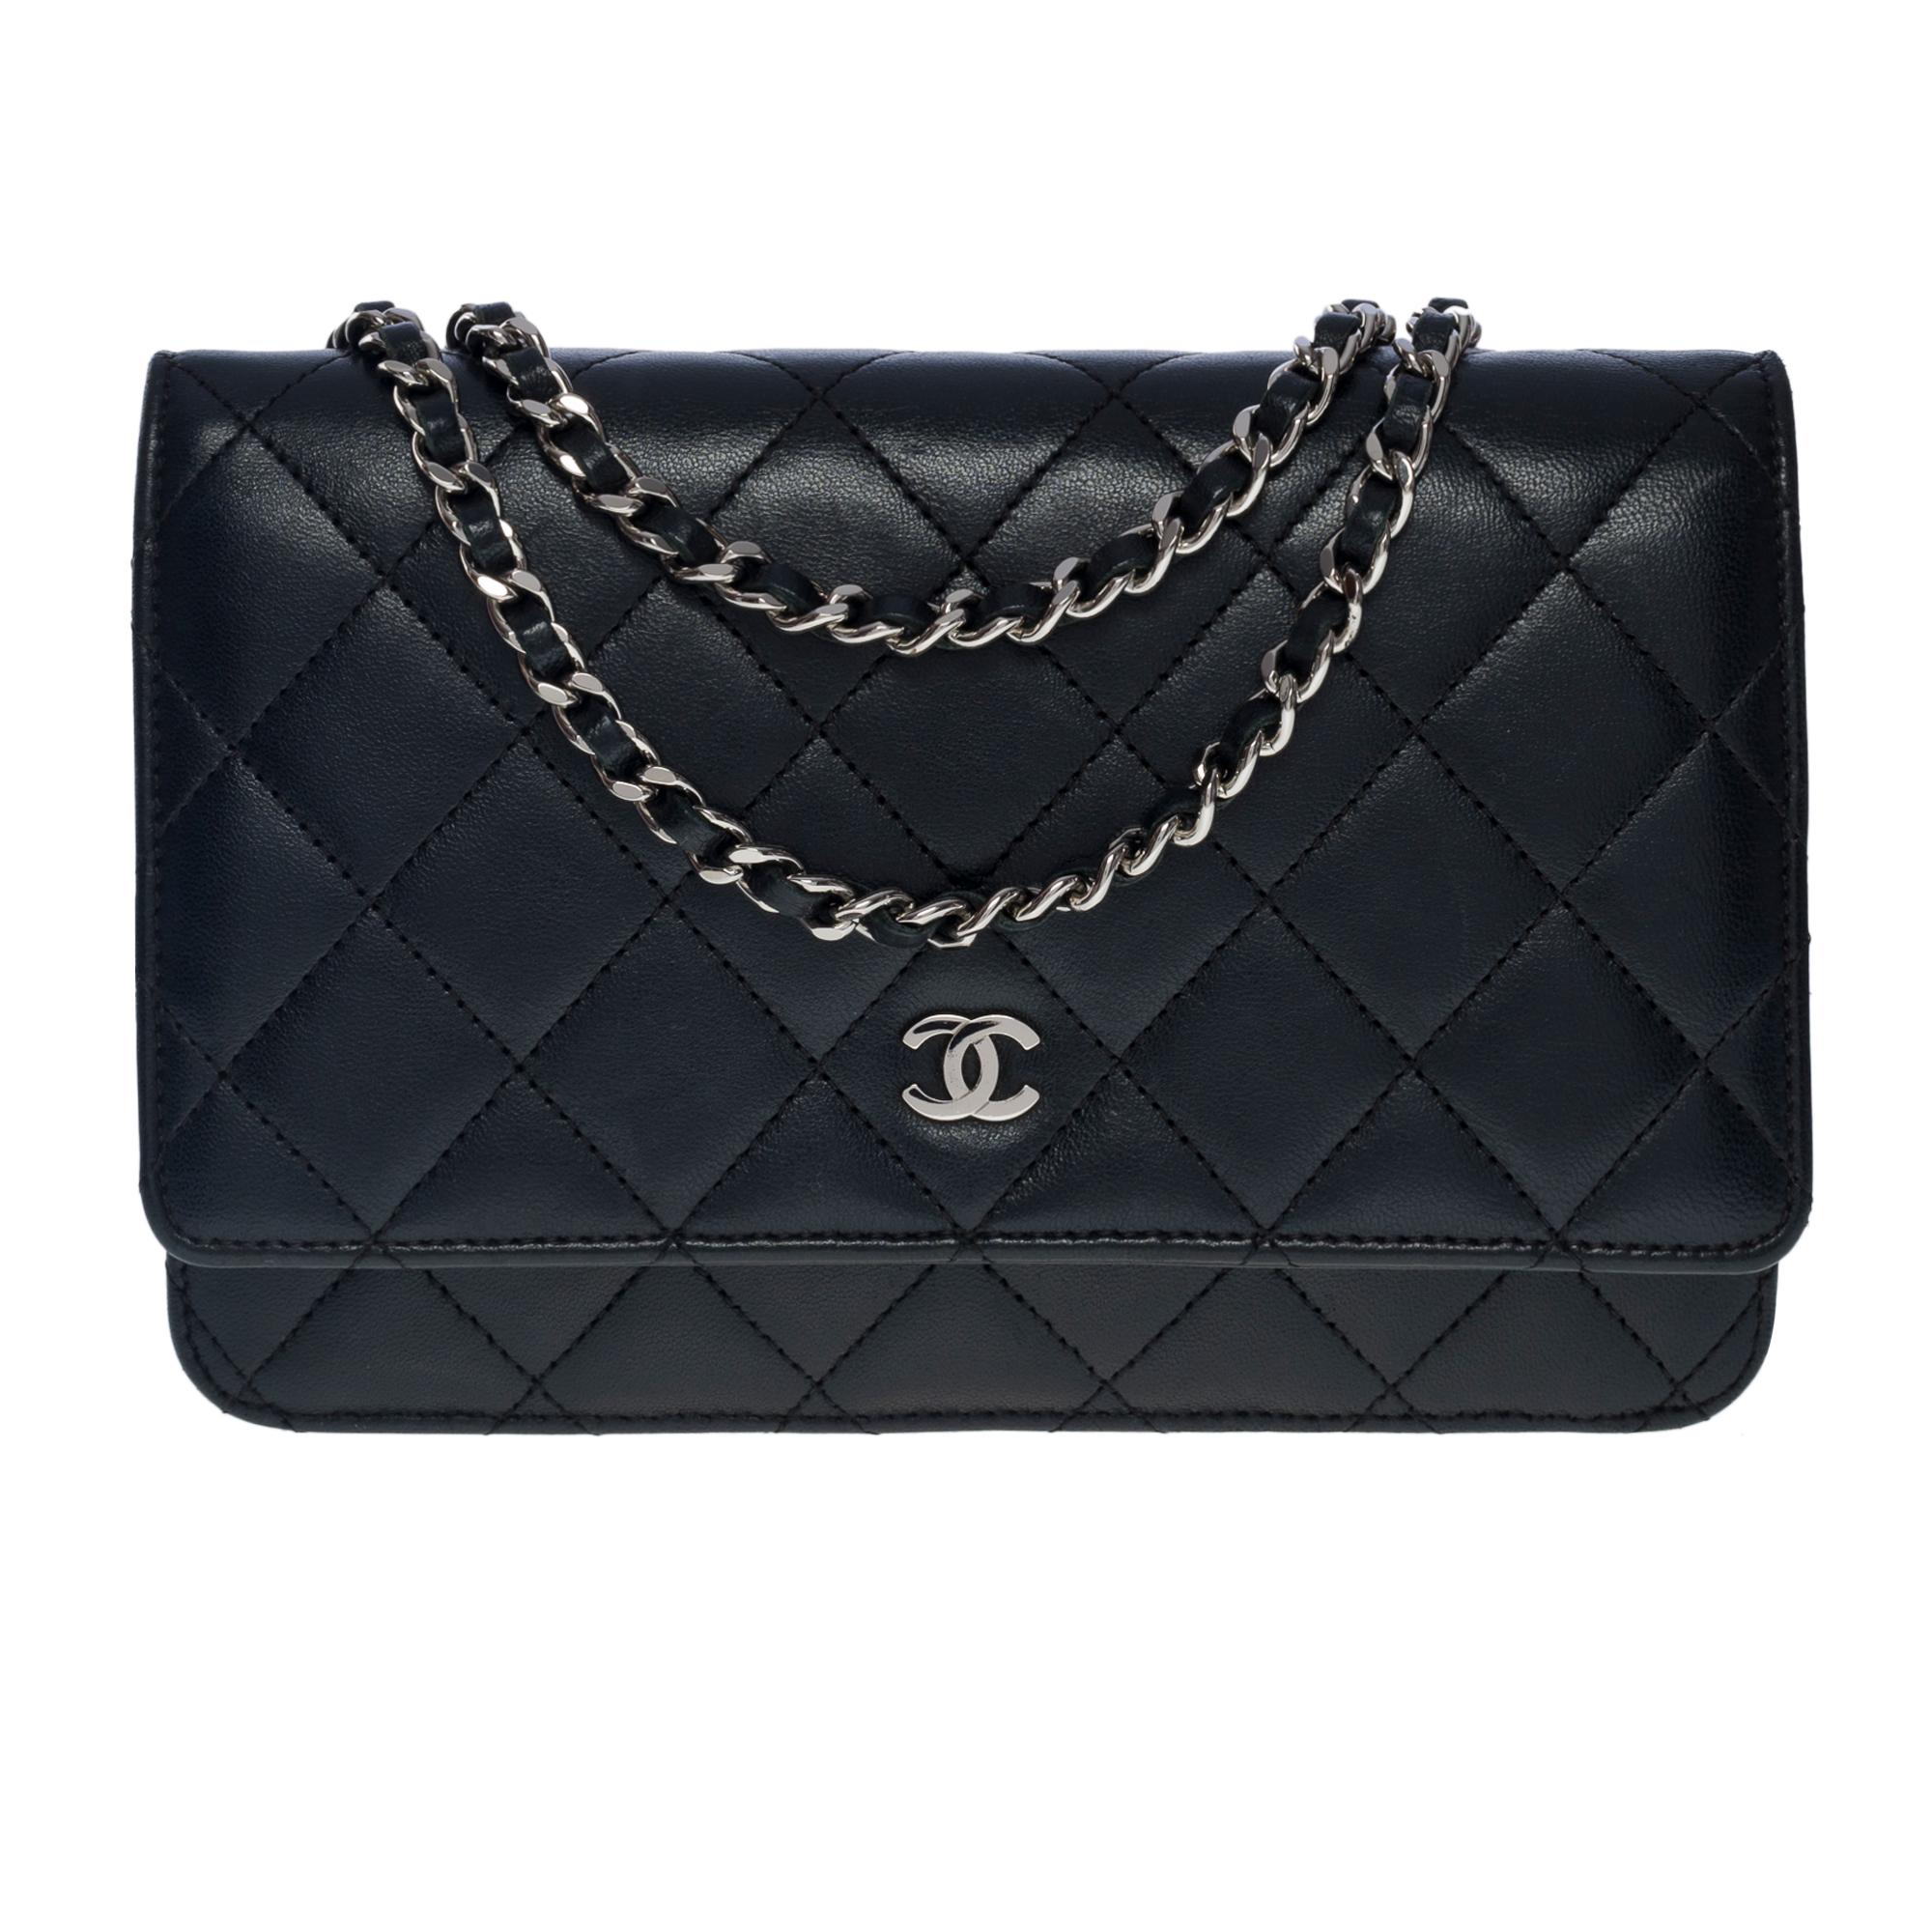 Lovely Chanel Wallet On Chain (WOC) shoulder bag in black quilted lambskin, silver metal hardware, a silver metal chain handle interwoven with black leather for a shoulder or crossbody carry
A patch pocket at the back of the bag
Closure by flap, CC